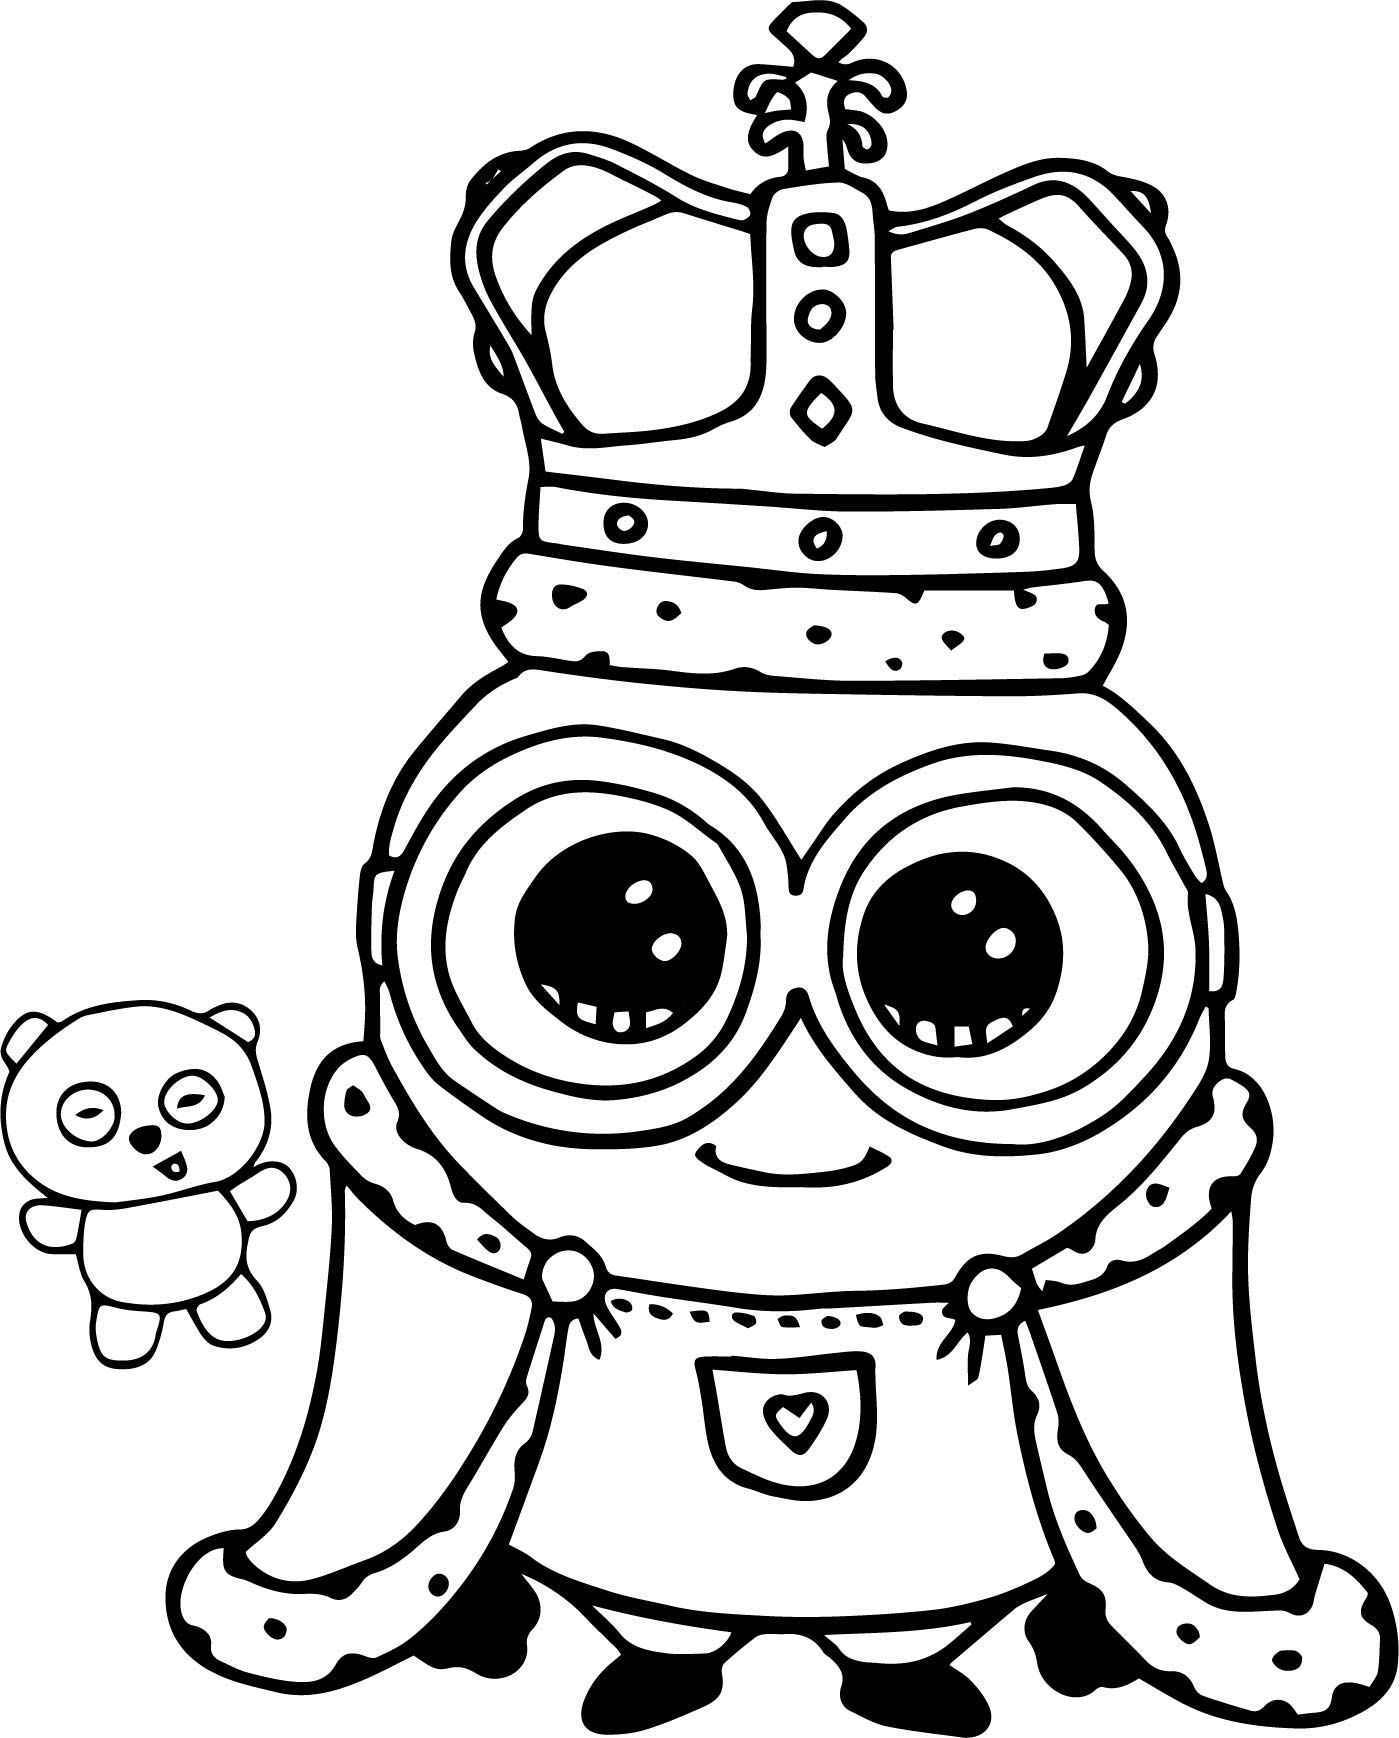 nice Minion King Bob Cute Coloring Page | Minion coloring pages, Minions  coloring pages, Cute coloring pages